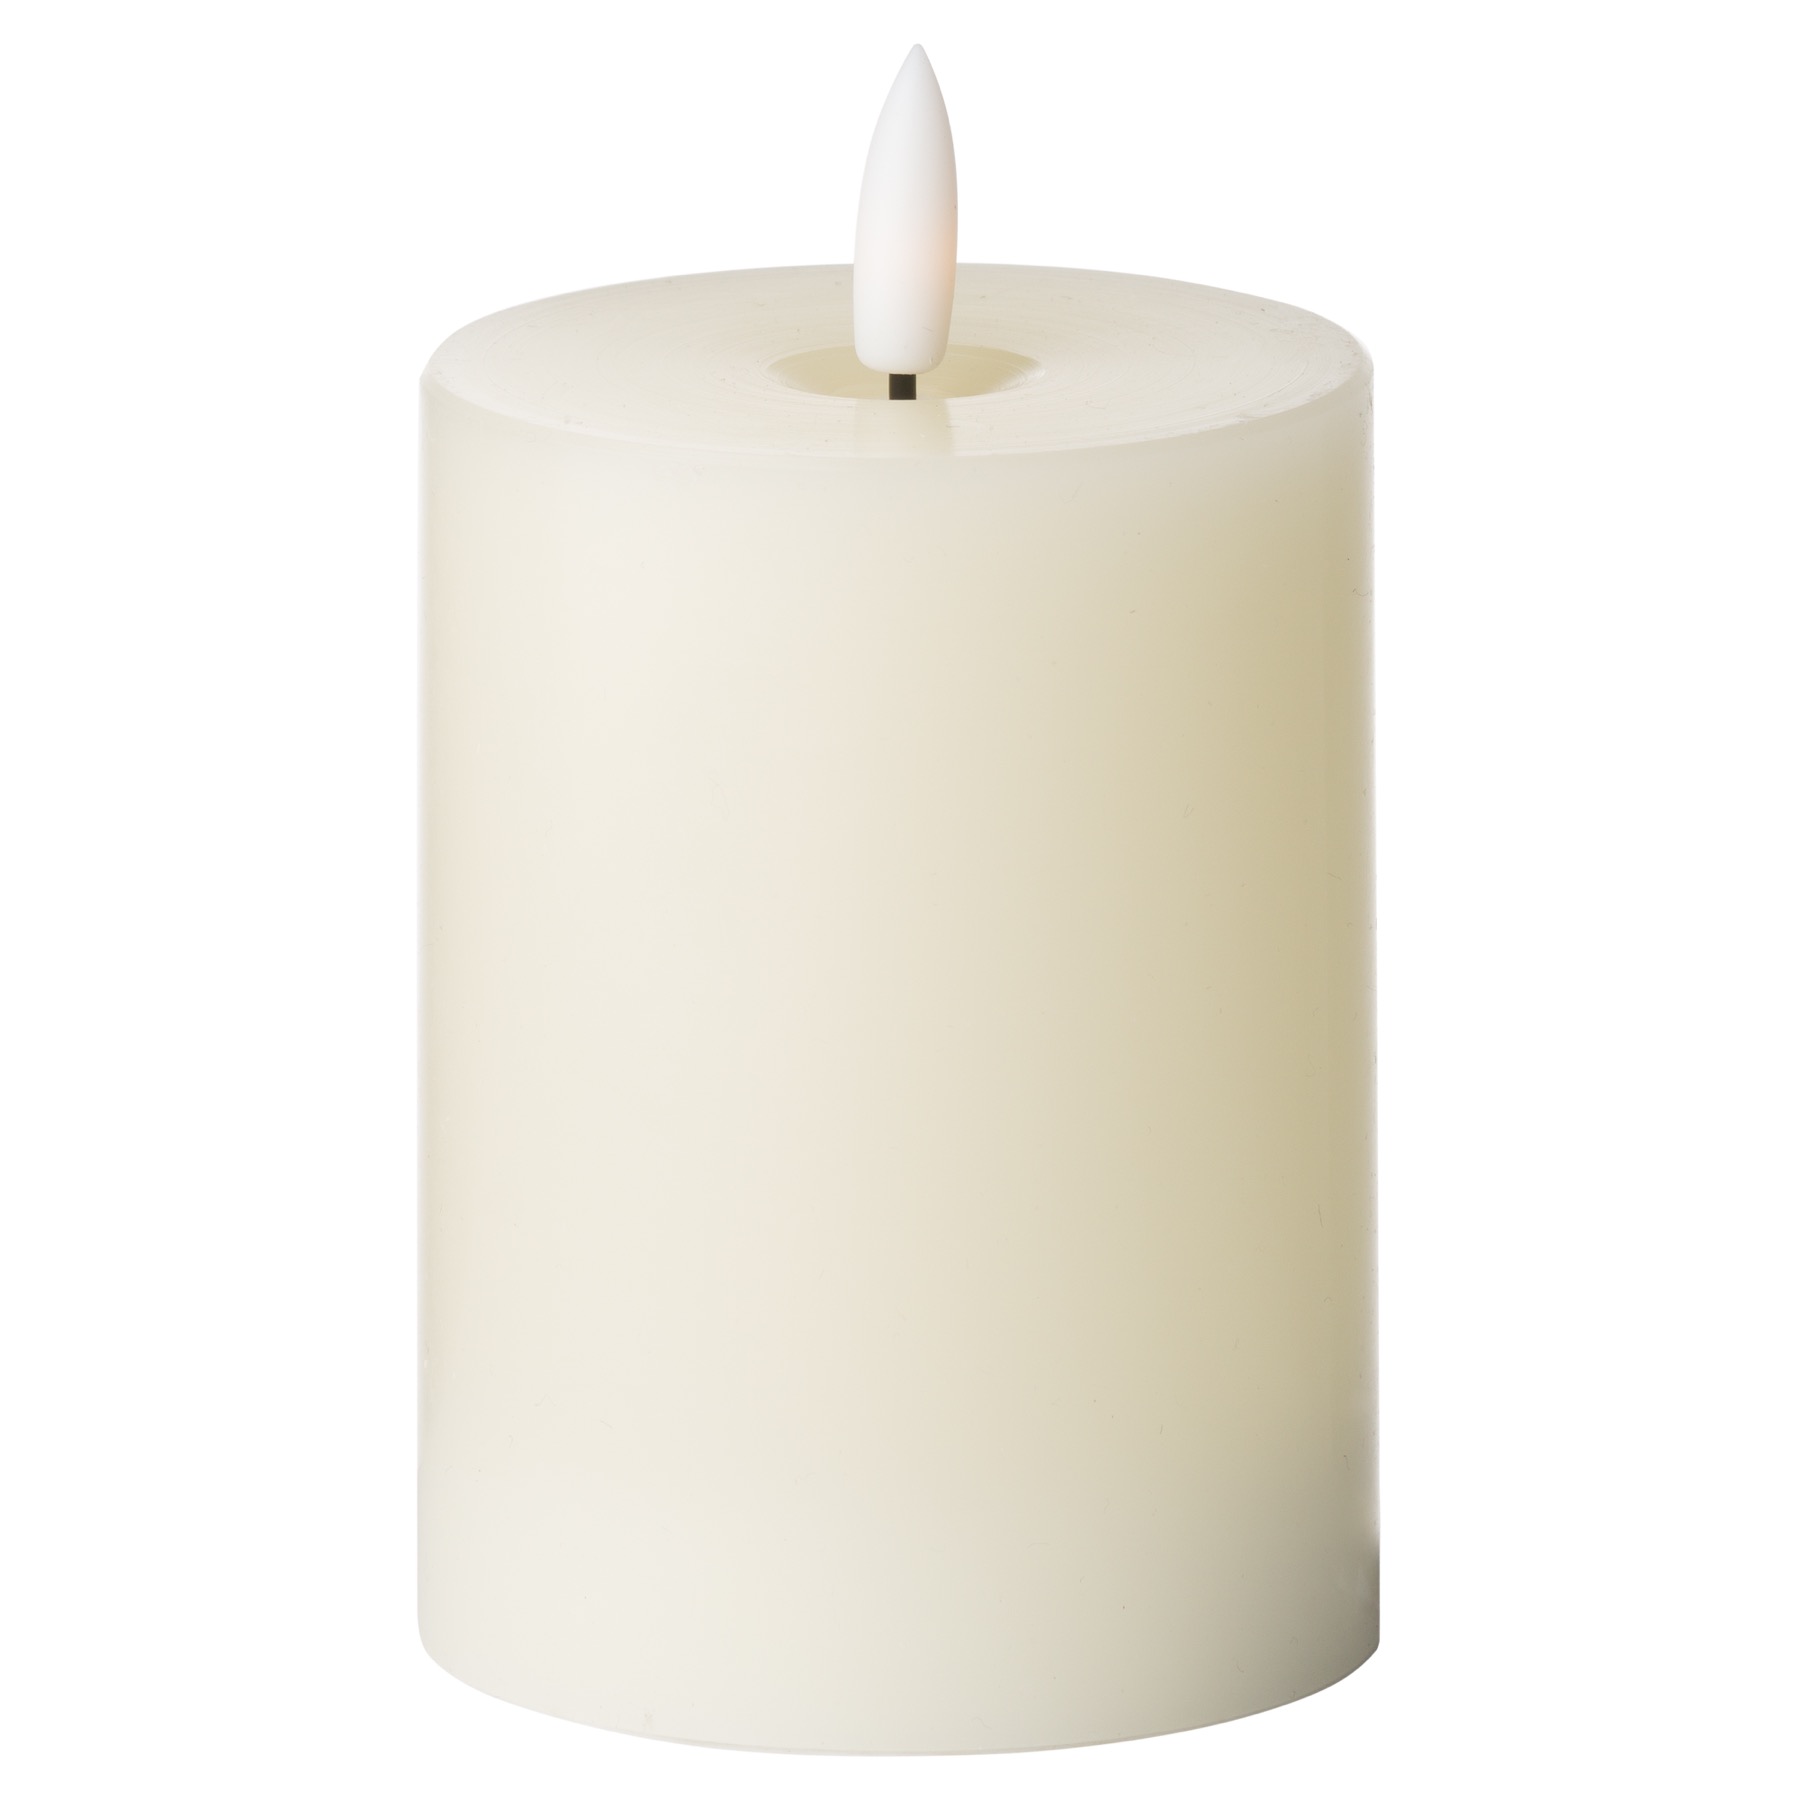 Luxe Collection Natural Glow 3 x 4 LED Ivory Candle - Image 1